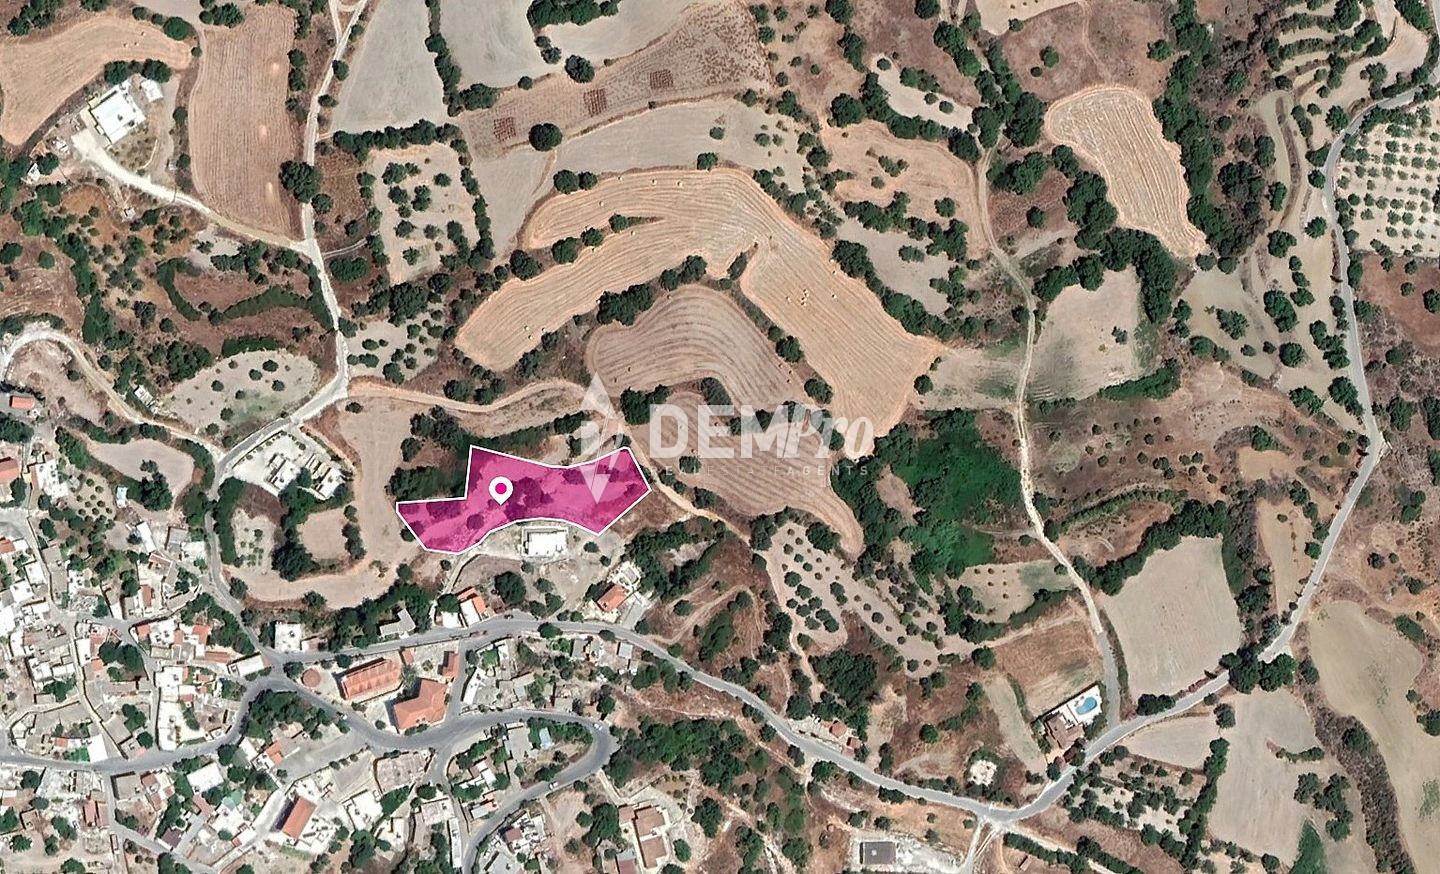 Residential Land  For Sale in Peristerona, Paphos - DP3529